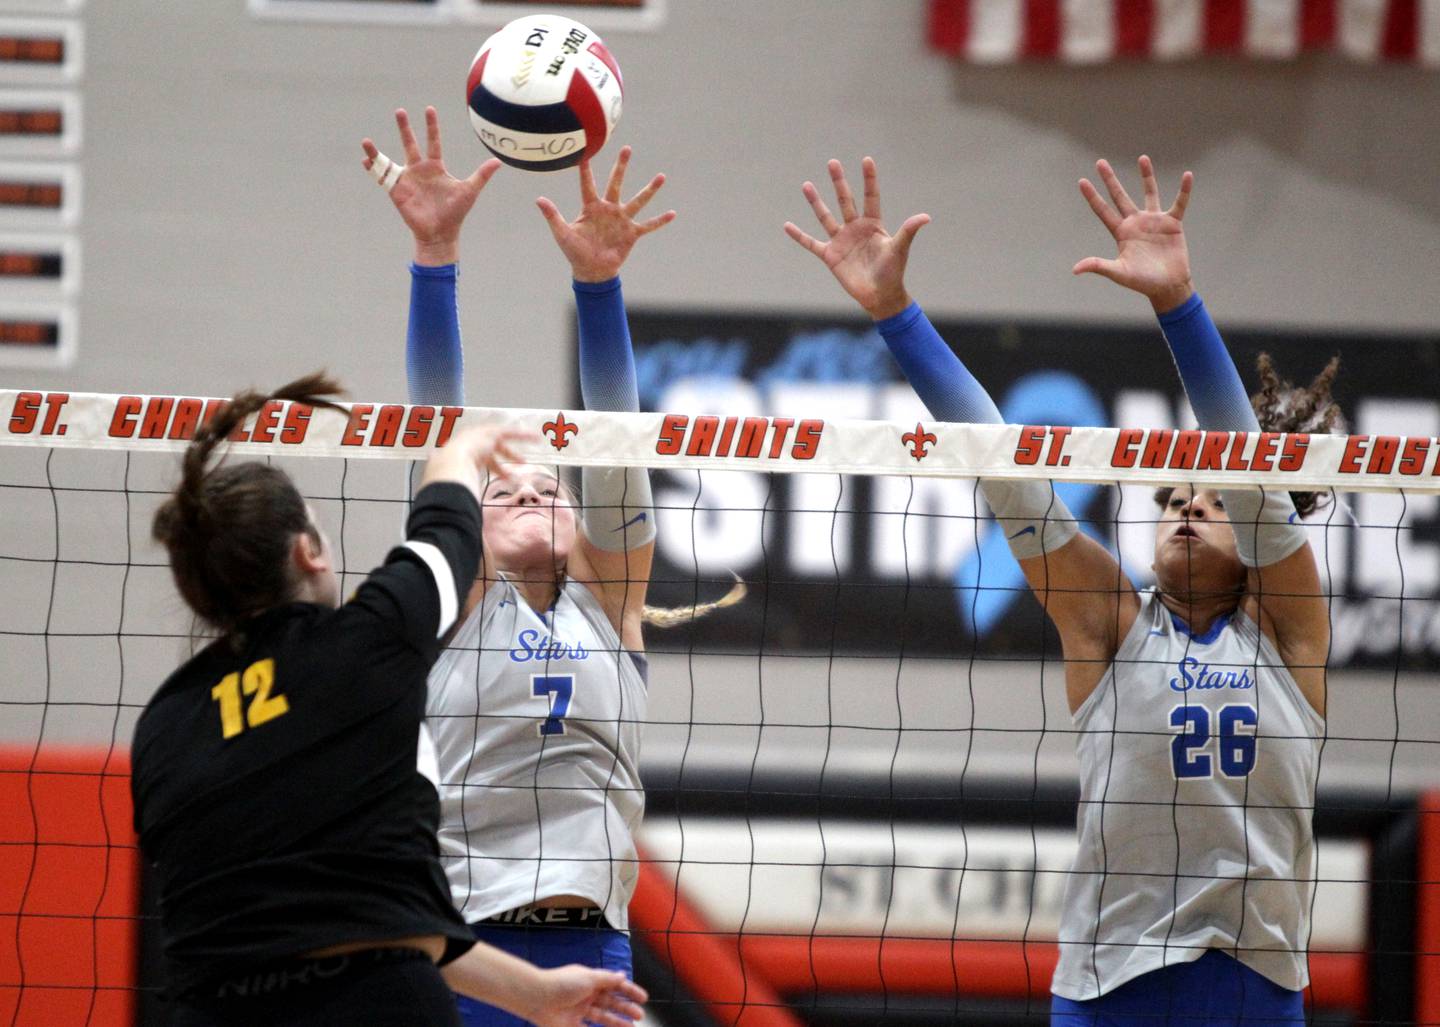 St. Charles North’s Mia McCall (left) and Sidney Wright attempt a block from St. Charles East’s Kaylee McInnis during a game at St. Charles East on Tuesday, Sept. 26, 2023.